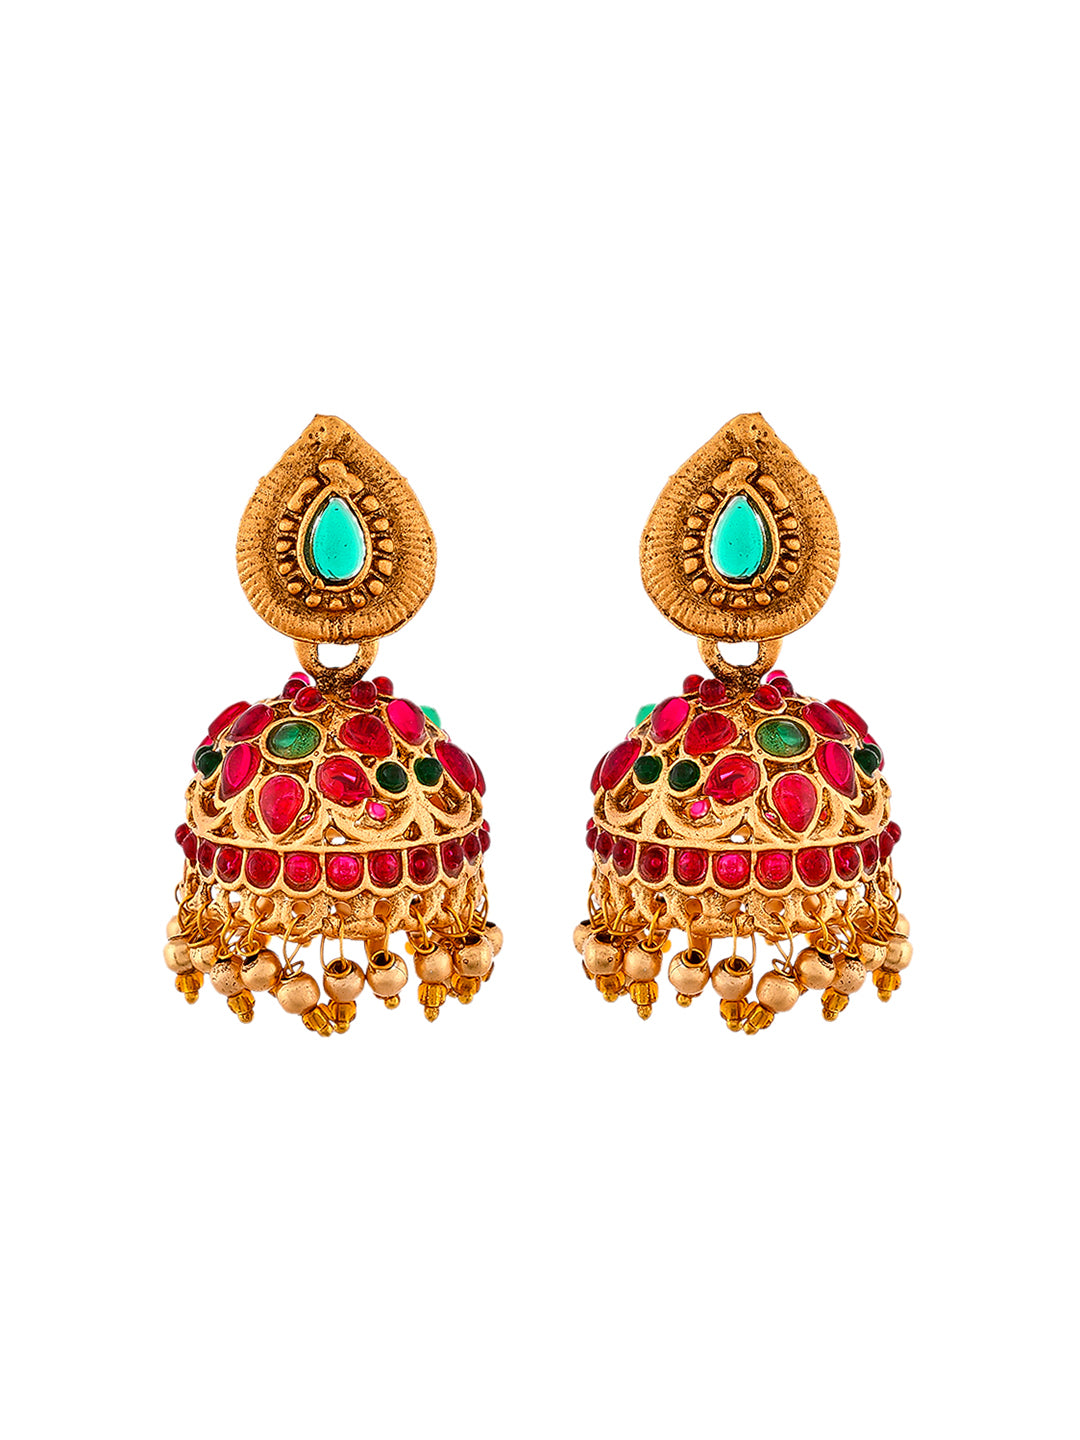 Tips to Shop the Best South Indian Wedding Jewellery • South India Jewels